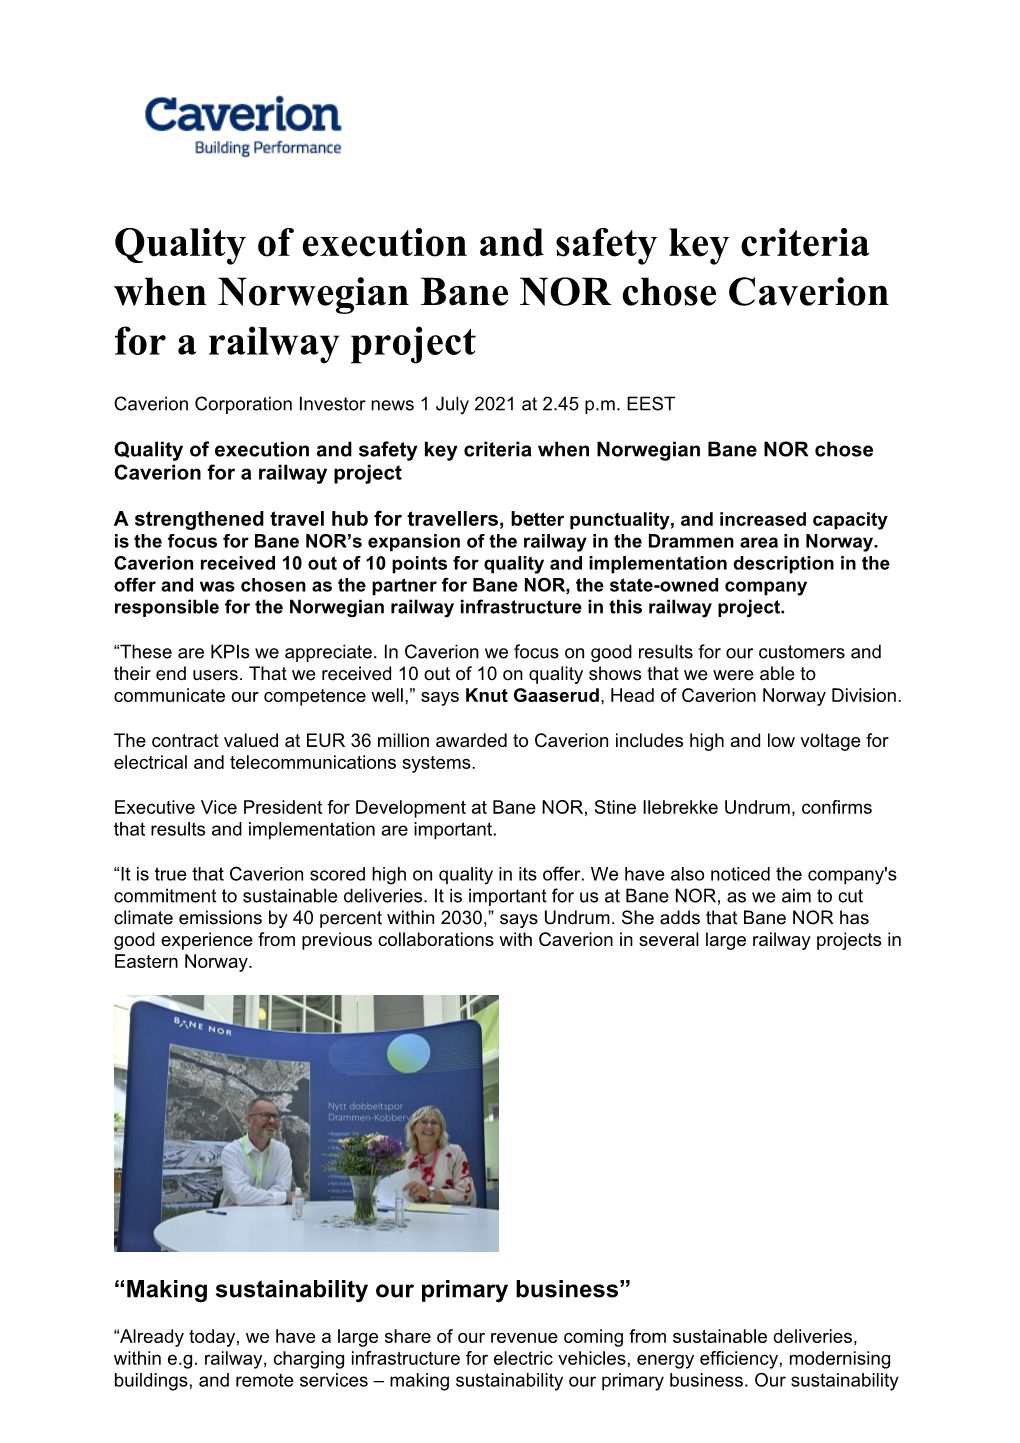 Quality of Execution and Safety Key Criteria When Norwegian Bane NOR Chose Caverion for a Railway Project